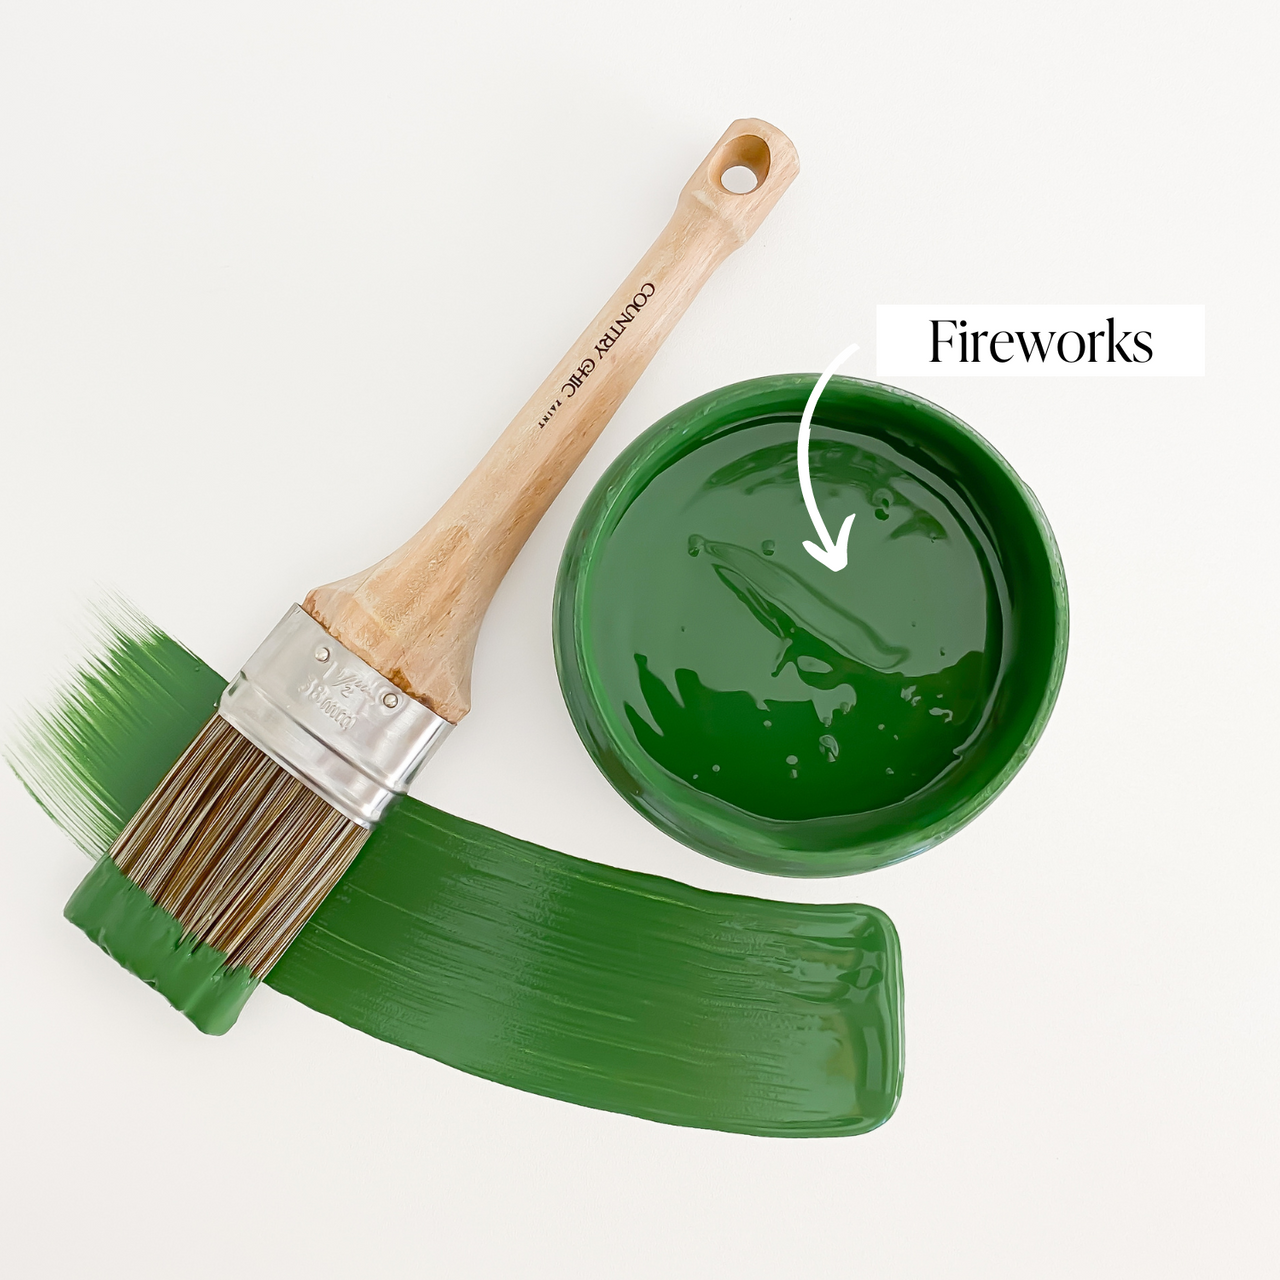 Top view of an open 16oz jar of Country Chic Chalk Style All-In-One Paint in the color Fireworks. Emerald green.